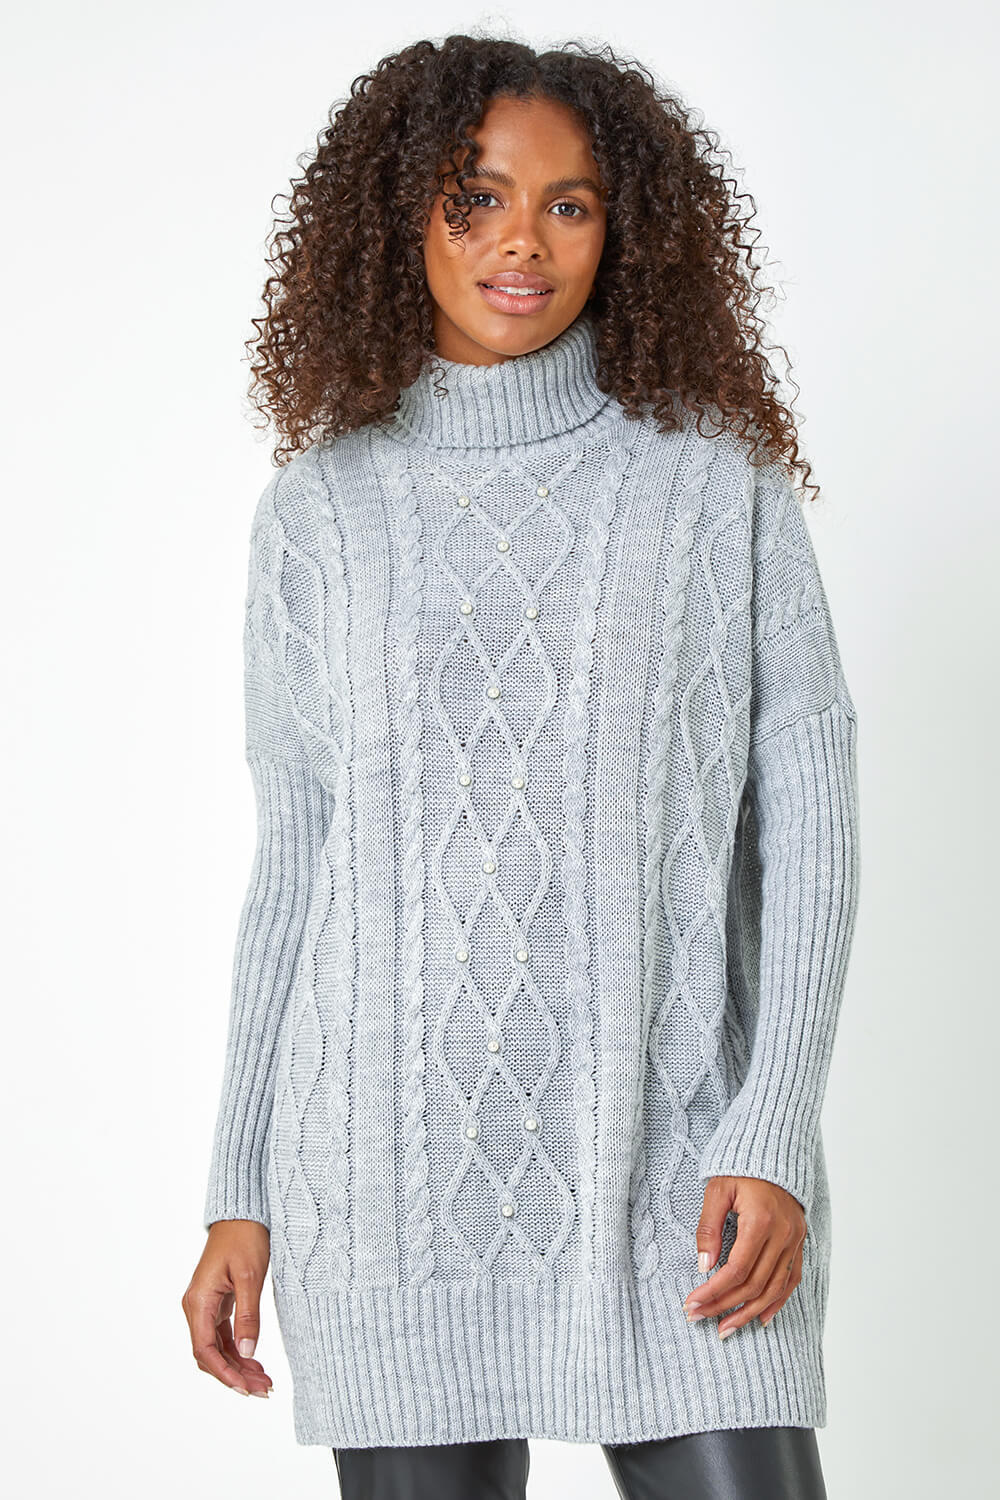 Grey Pearl Embellished Cable Knit Longline Jumper, Image 1 of 5